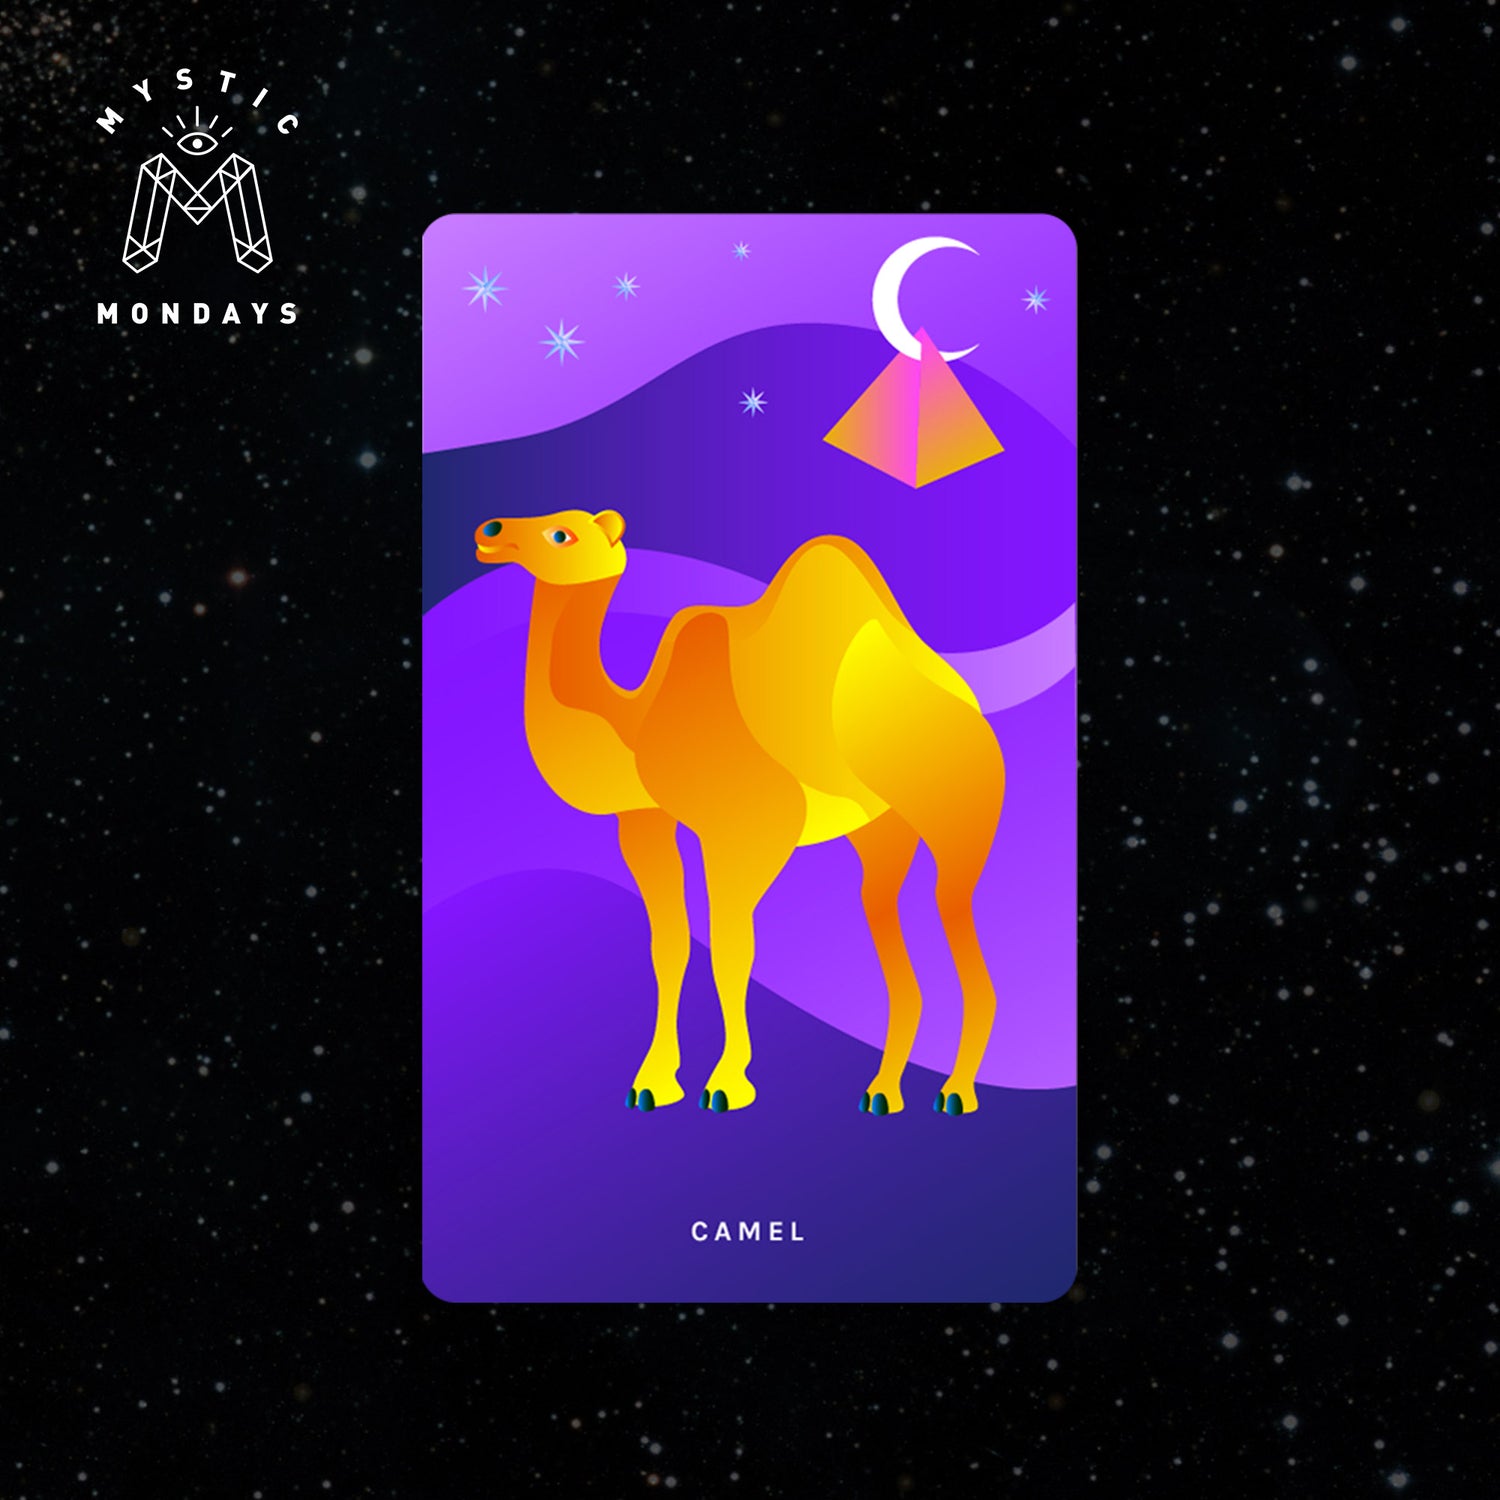 Camel Cosmic Creatures Card Cheat Sheet Reference Guide